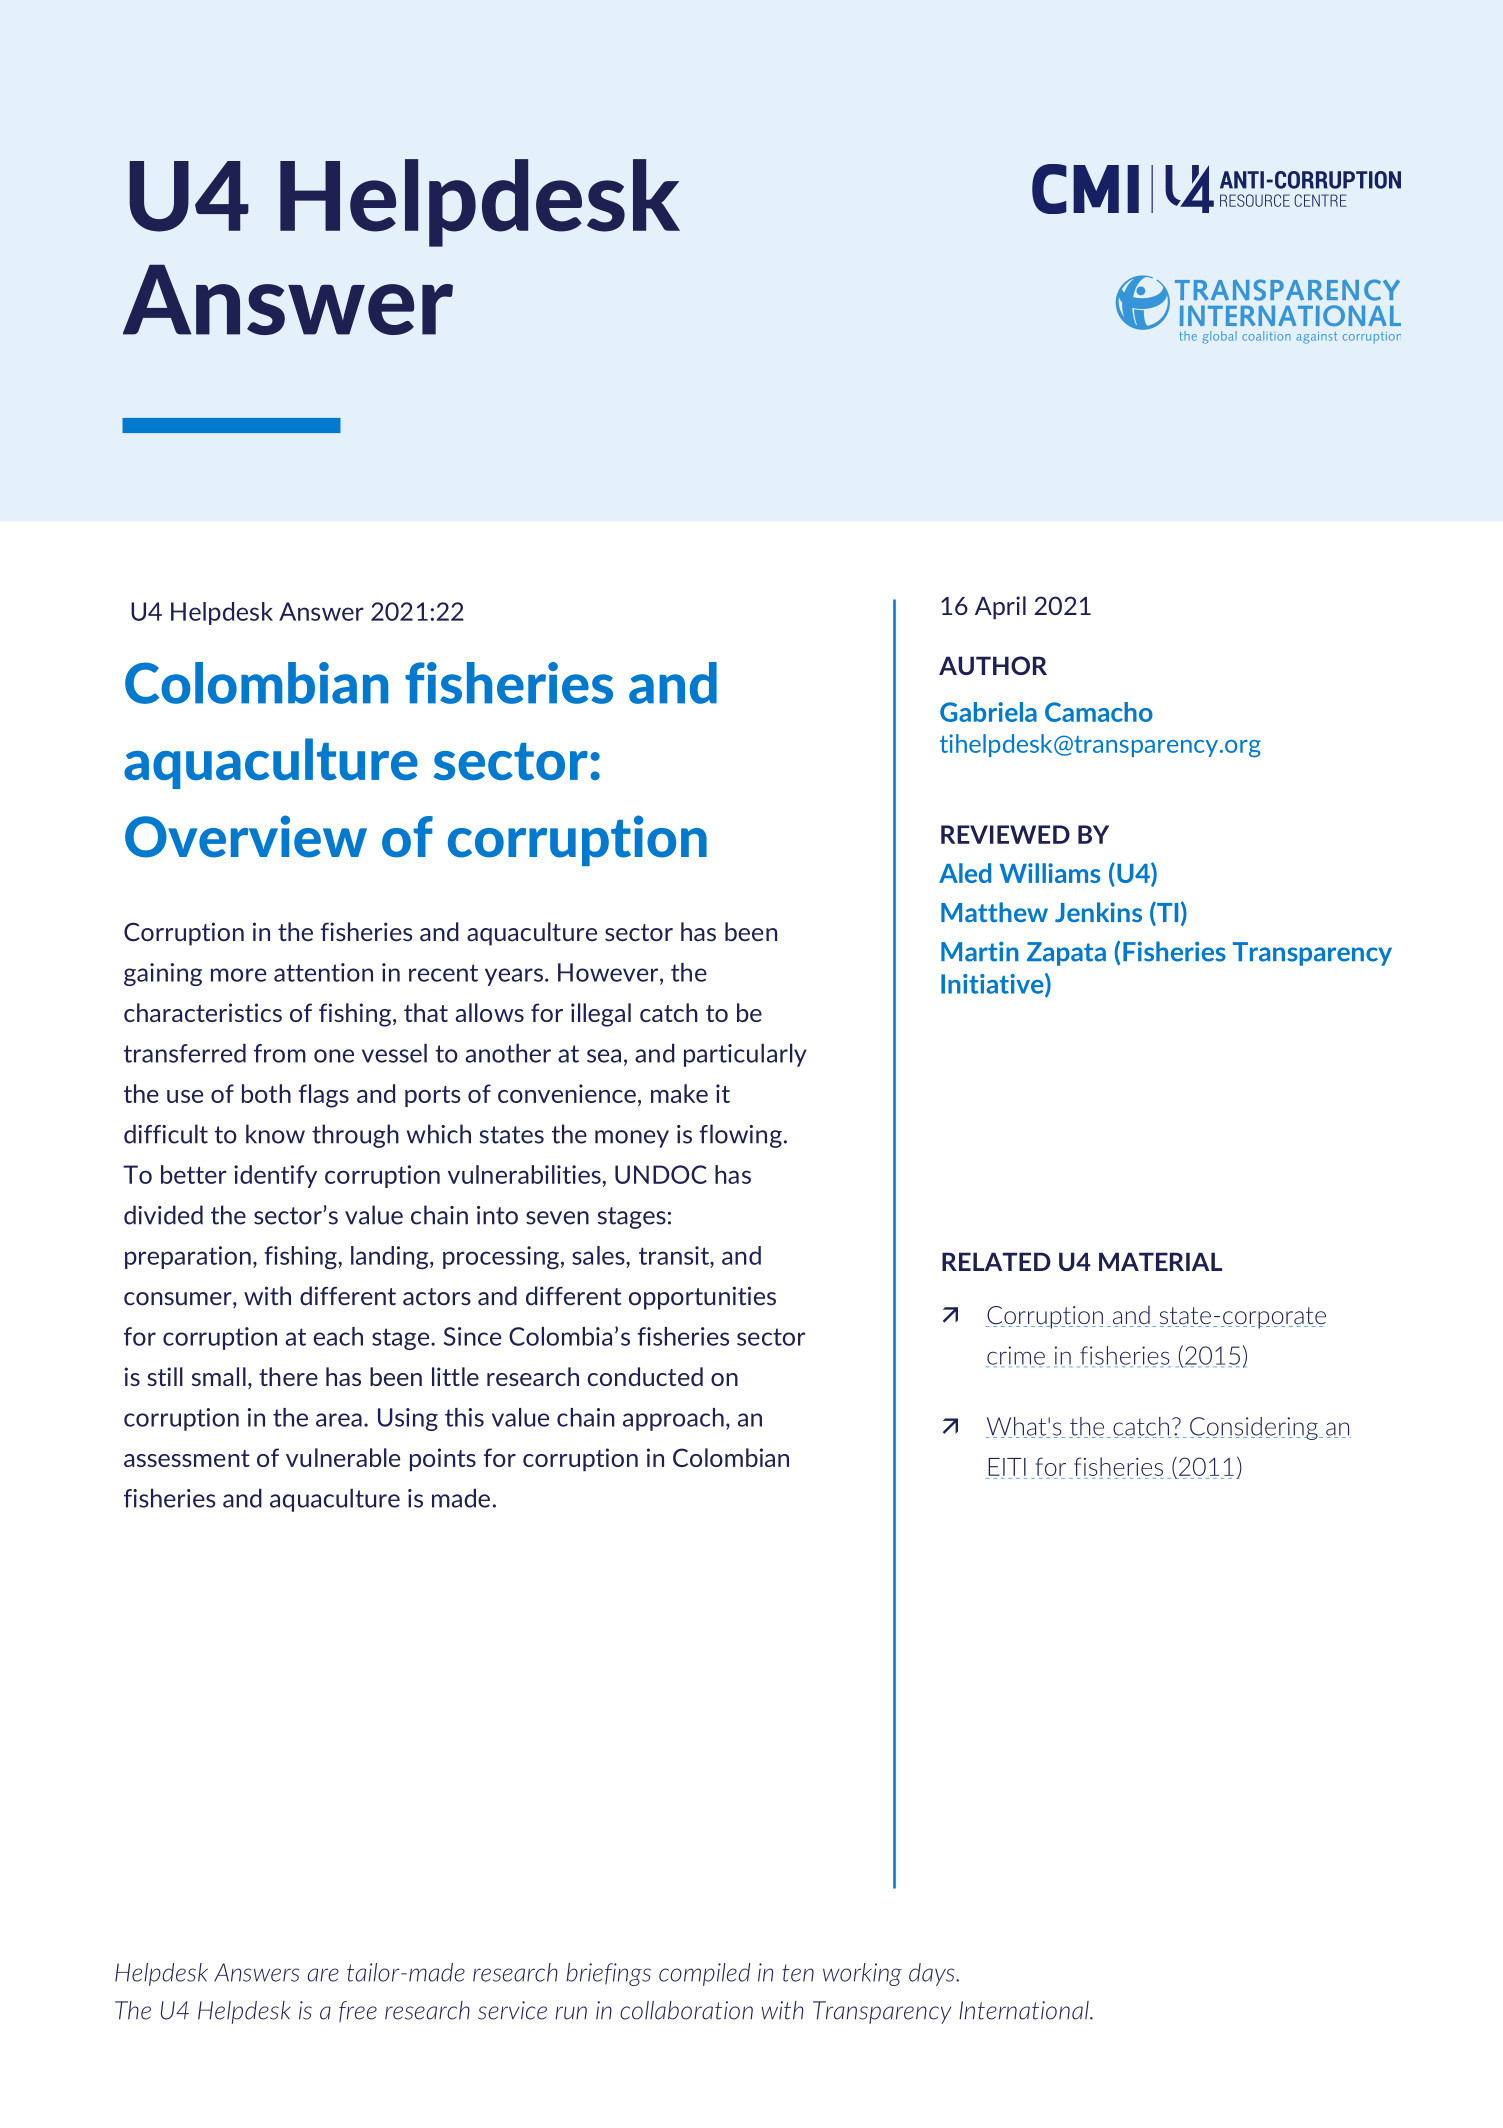 Colombian fisheries and aquaculture sector: Overview of corruption 